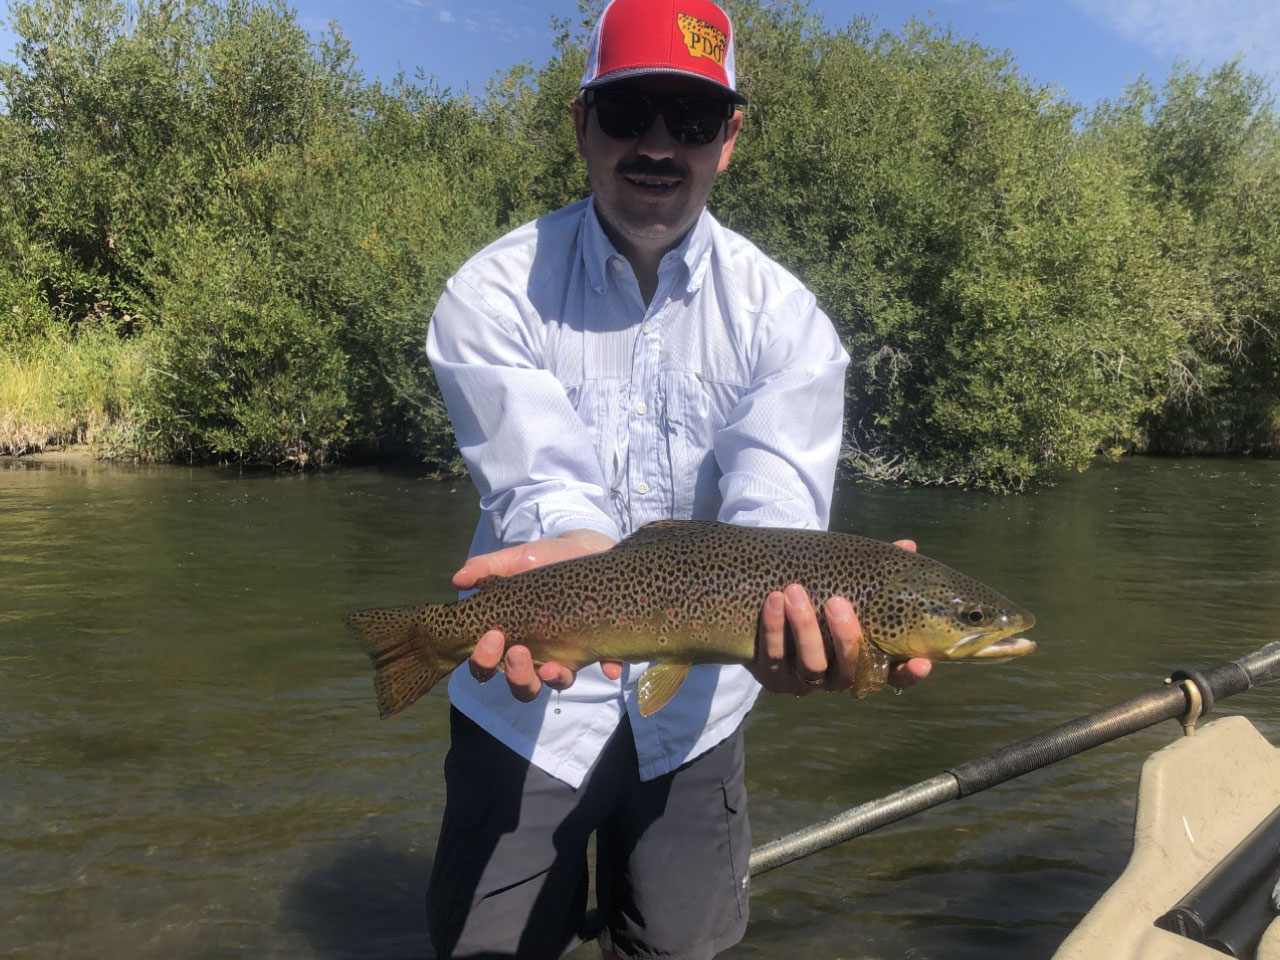 Fisherman with a big brown trout fish